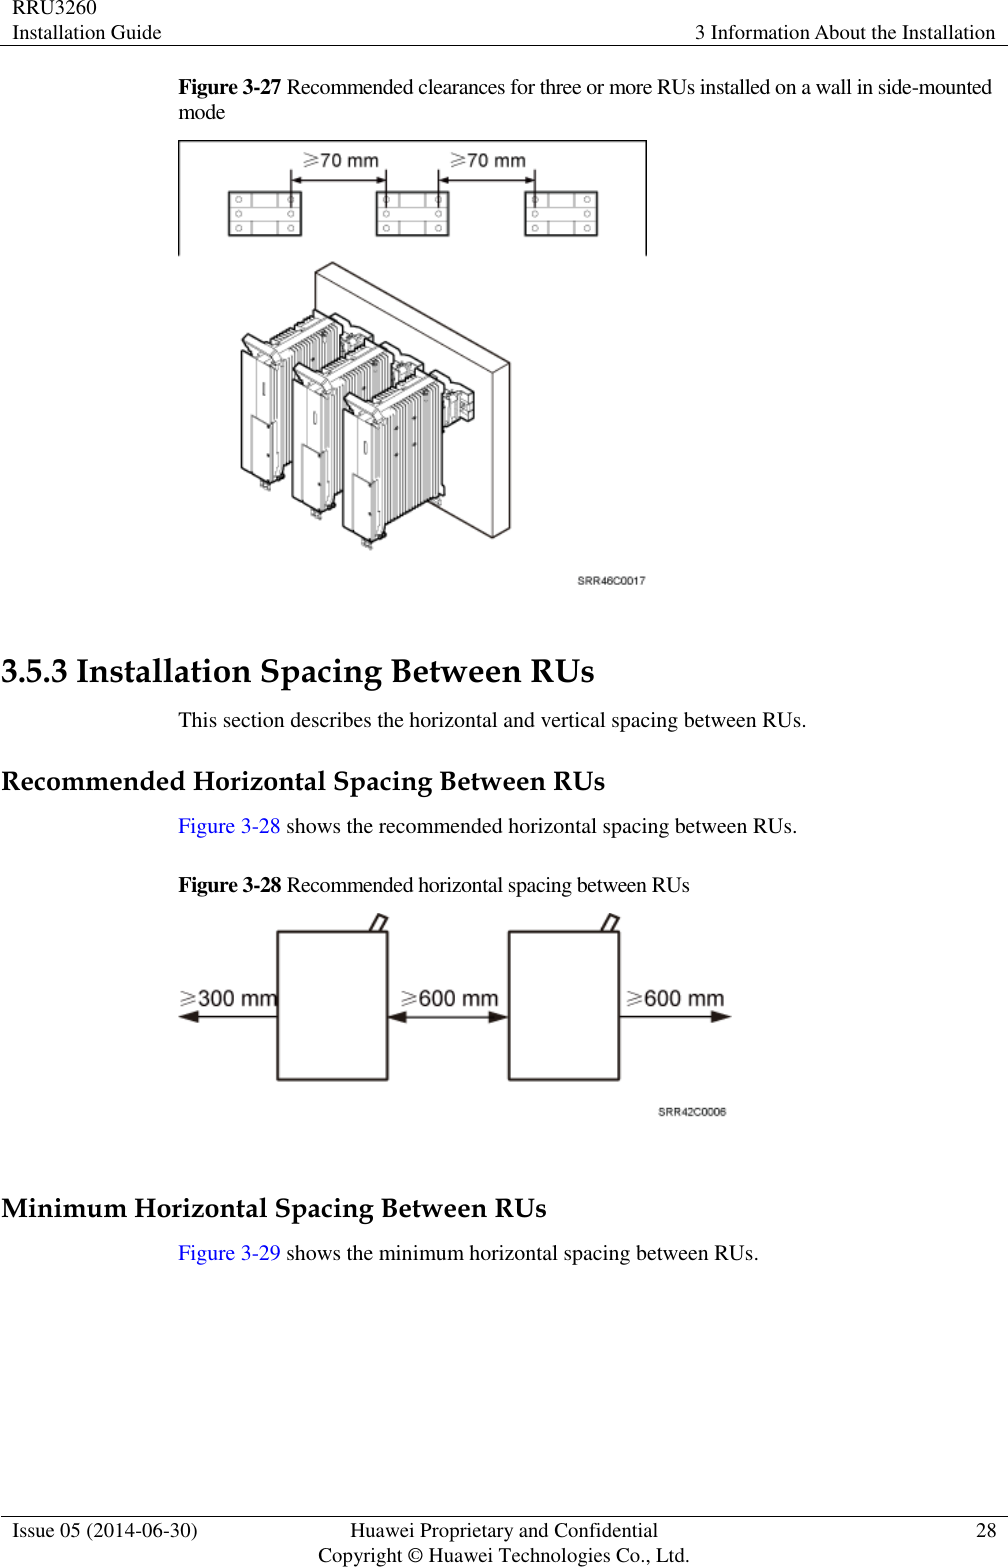 RRU3260 Installation Guide 3 Information About the Installation  Issue 05 (2014-06-30) Huawei Proprietary and Confidential                                     Copyright © Huawei Technologies Co., Ltd. 28  Figure 3-27 Recommended clearances for three or more RUs installed on a wall in side-mounted mode   3.5.3 Installation Spacing Between RUs This section describes the horizontal and vertical spacing between RUs. Recommended Horizontal Spacing Between RUs Figure 3-28 shows the recommended horizontal spacing between RUs. Figure 3-28 Recommended horizontal spacing between RUs   Minimum Horizontal Spacing Between RUs Figure 3-29 shows the minimum horizontal spacing between RUs.   